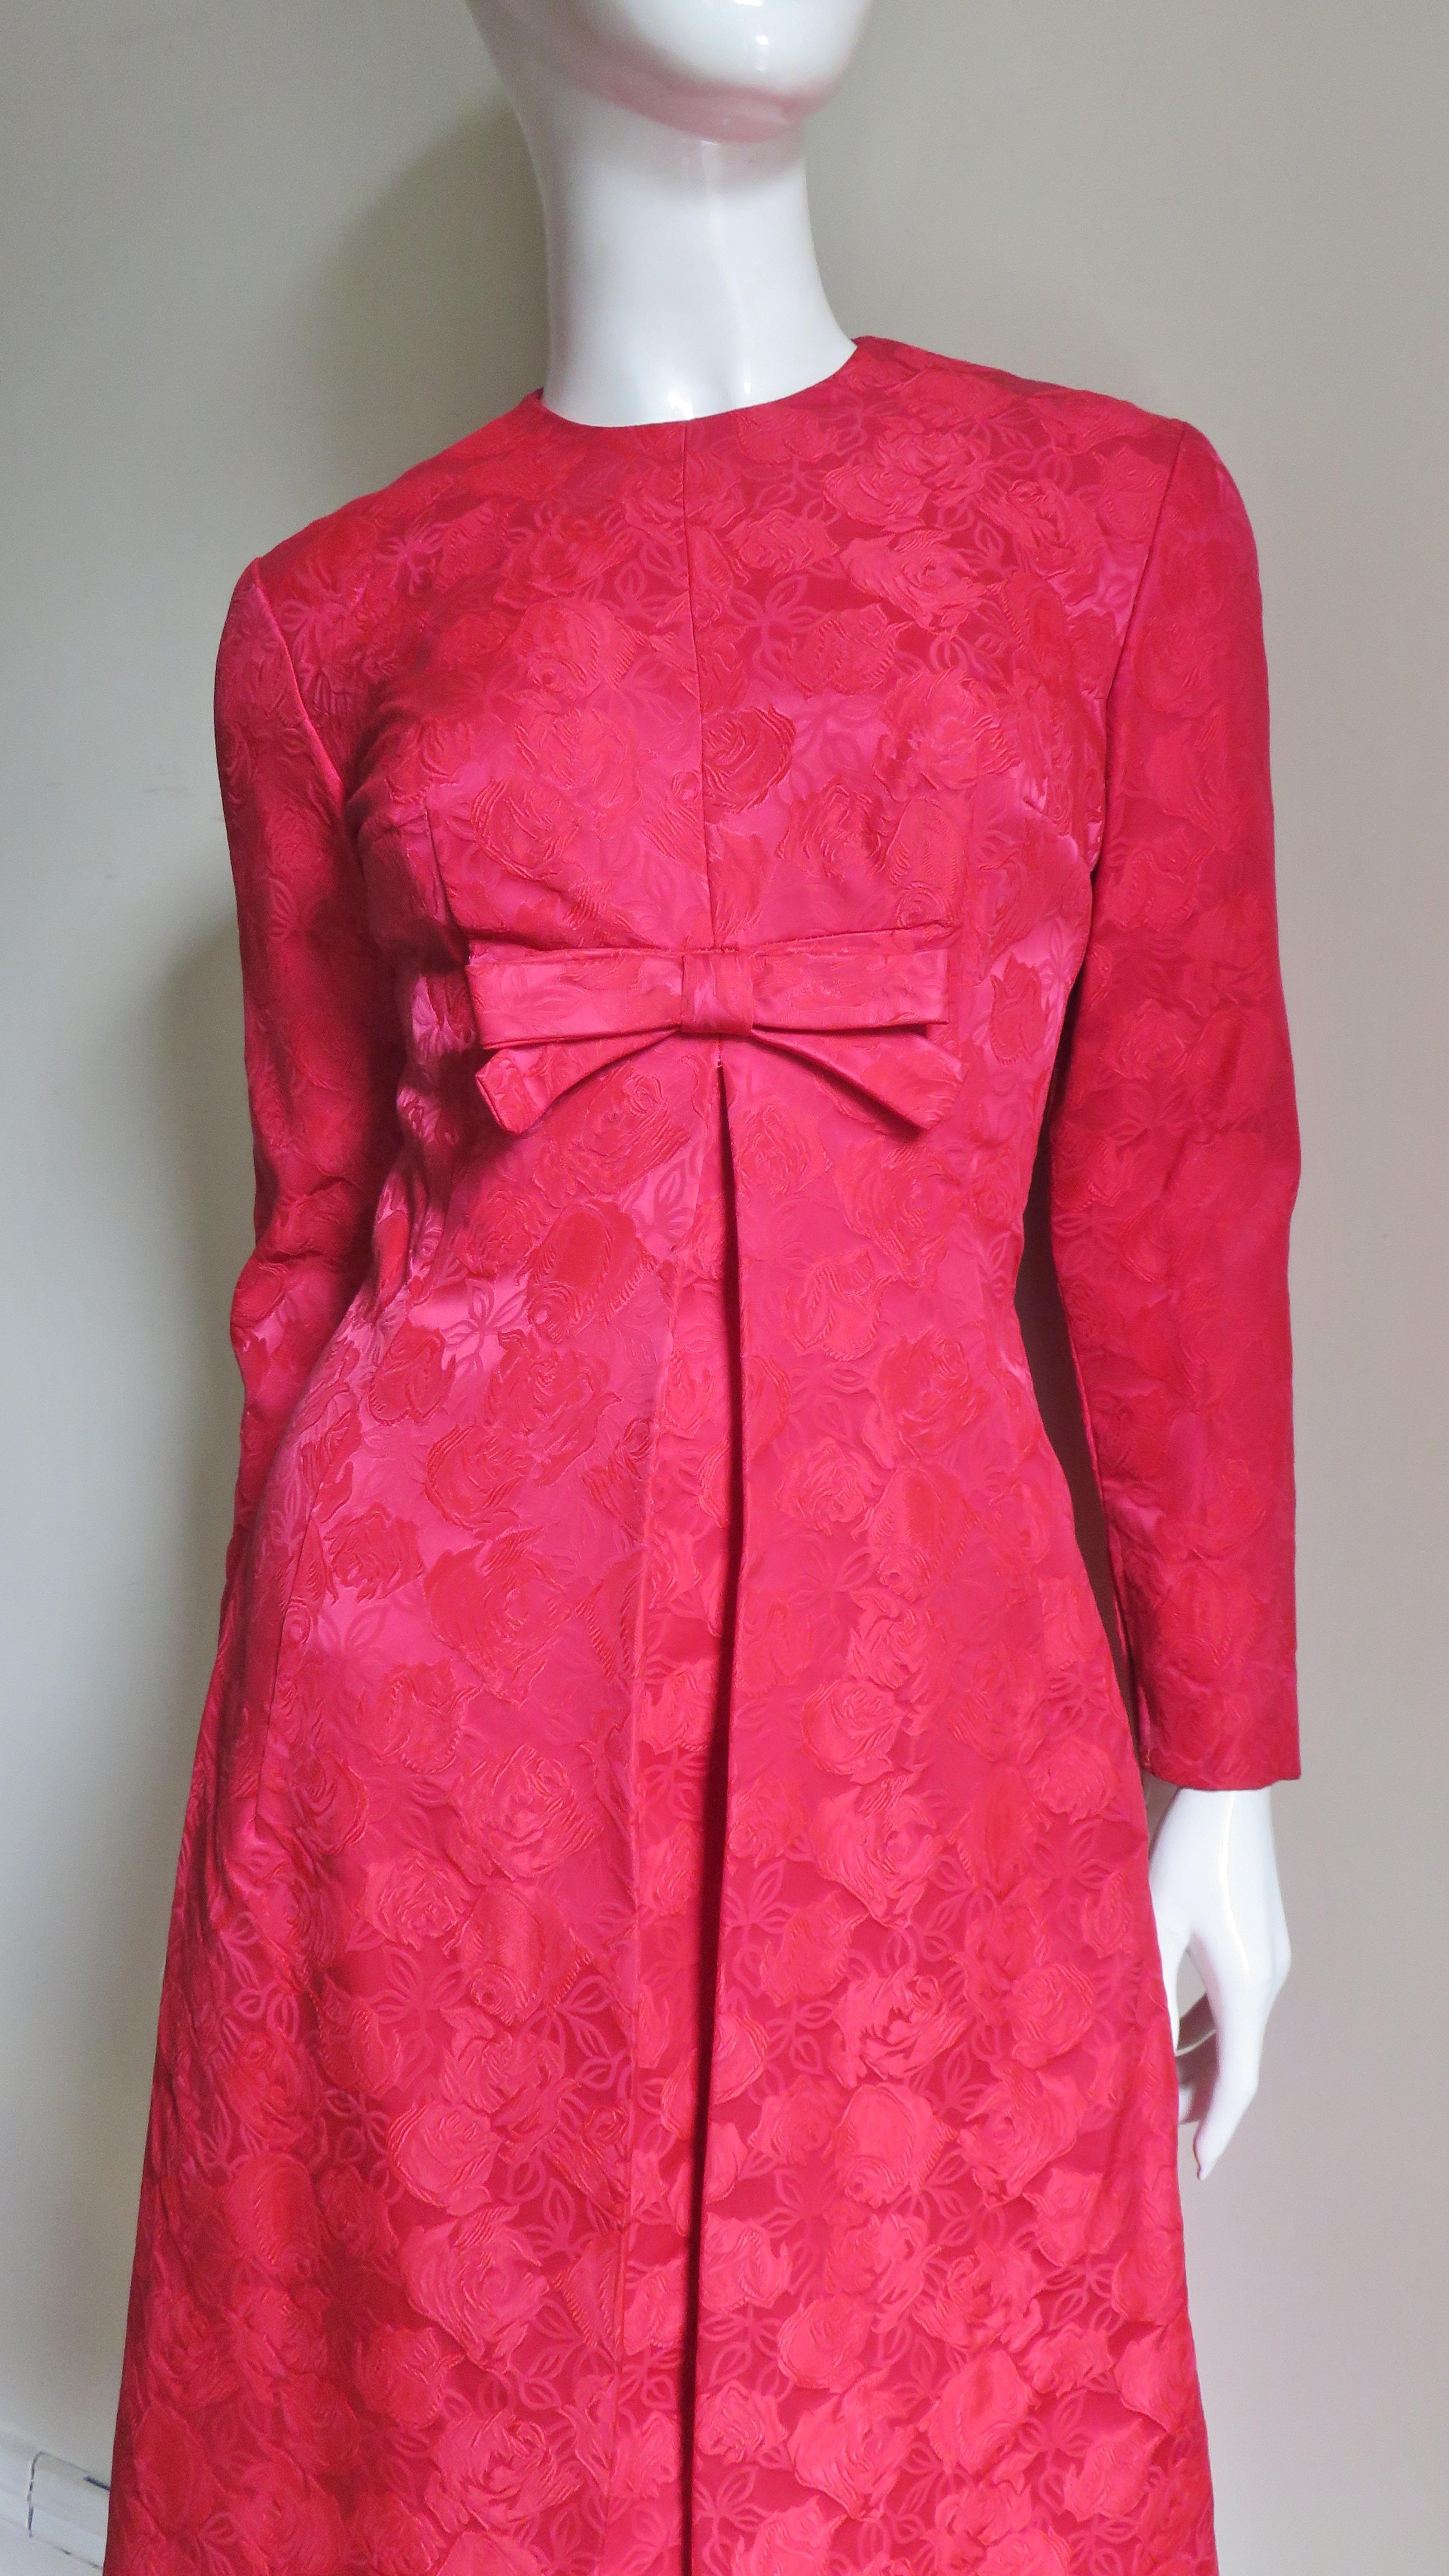 Suzy Perette New Damask Dress and Overdress 1950s 1